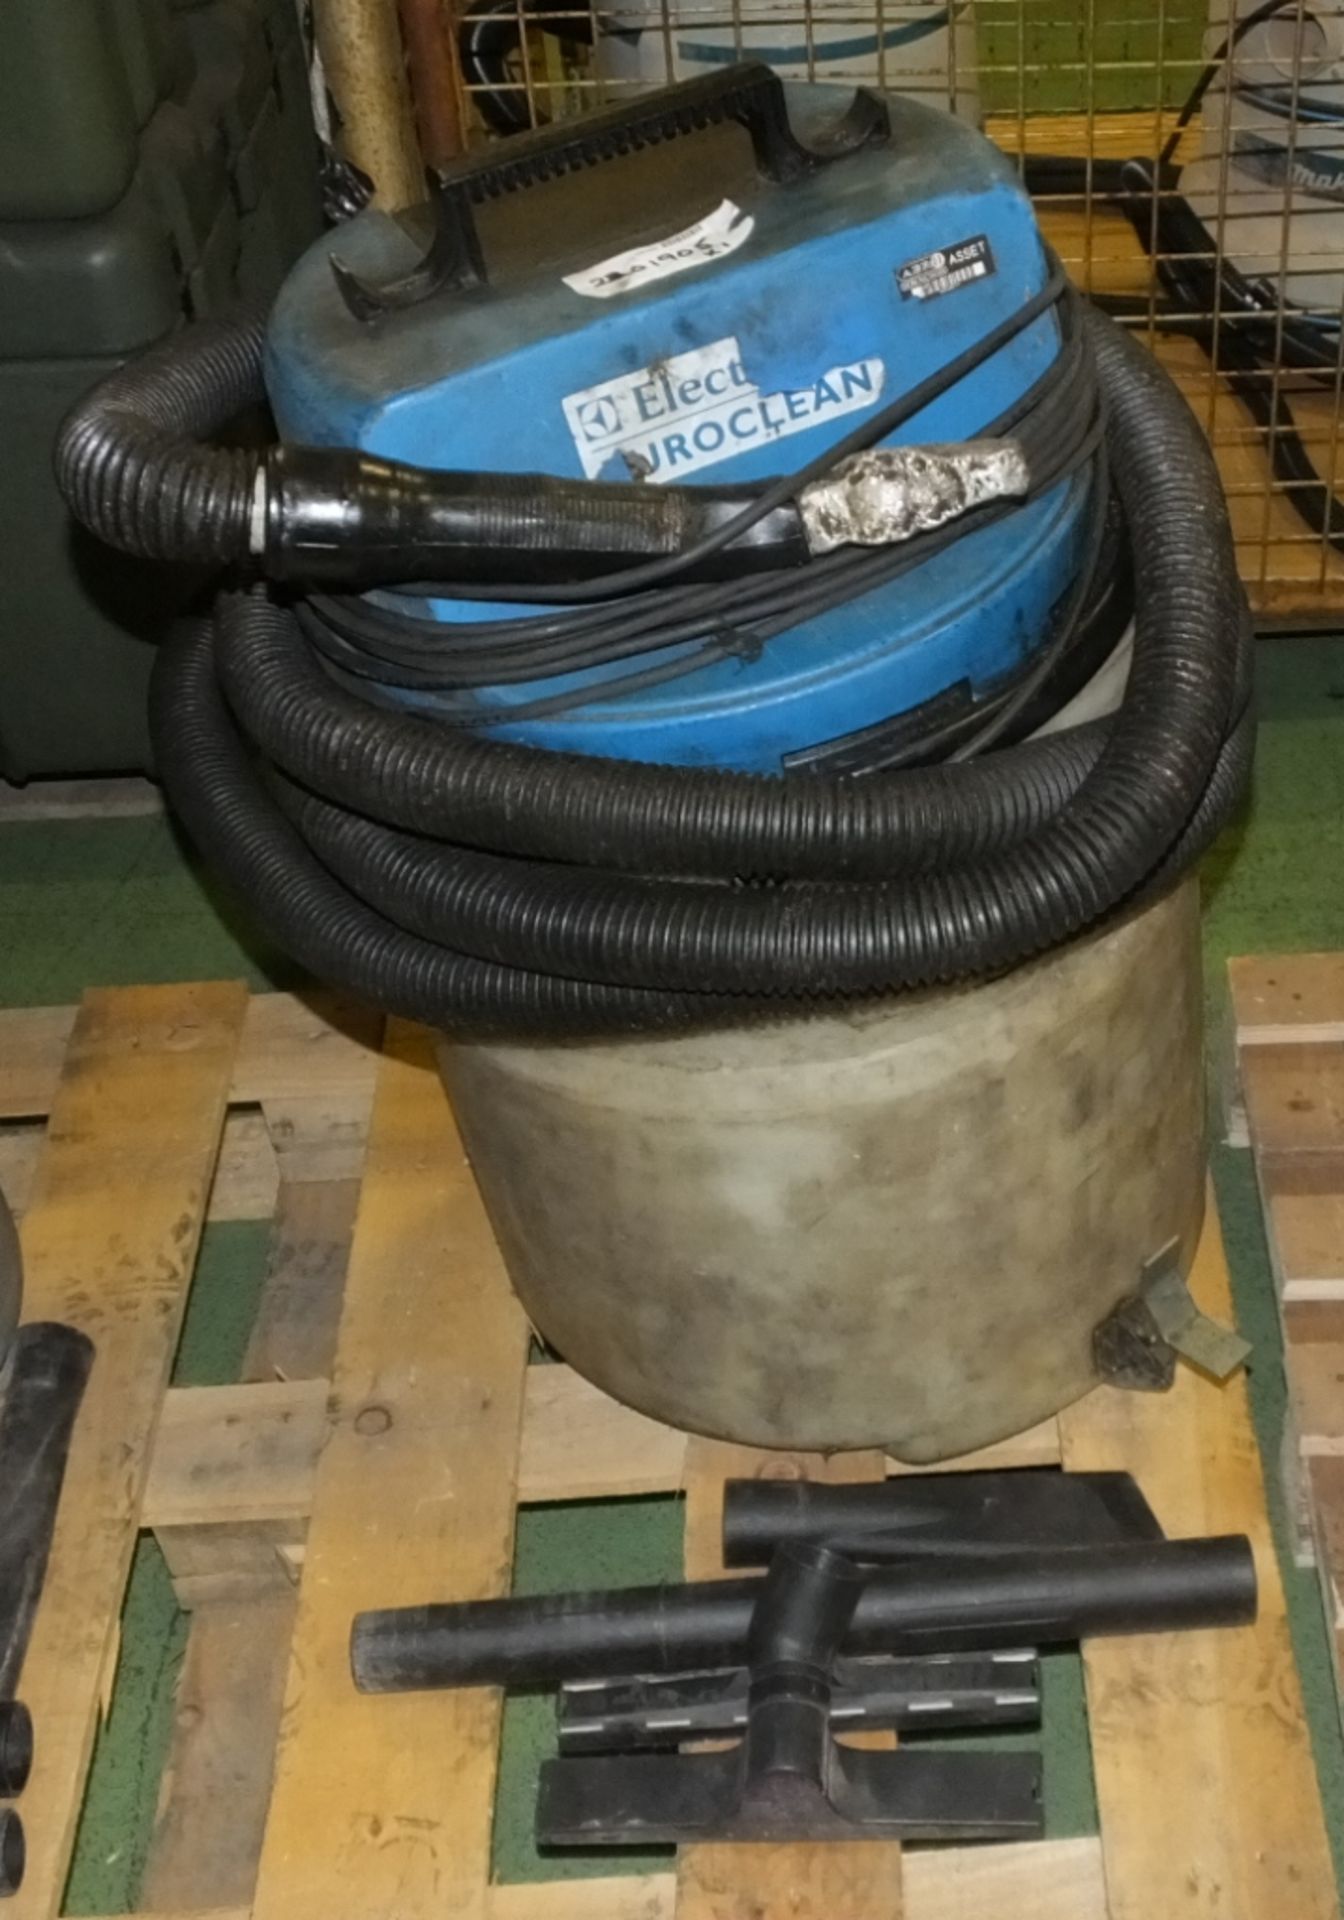 Electrolux Vacuum Cleaner with some attachments